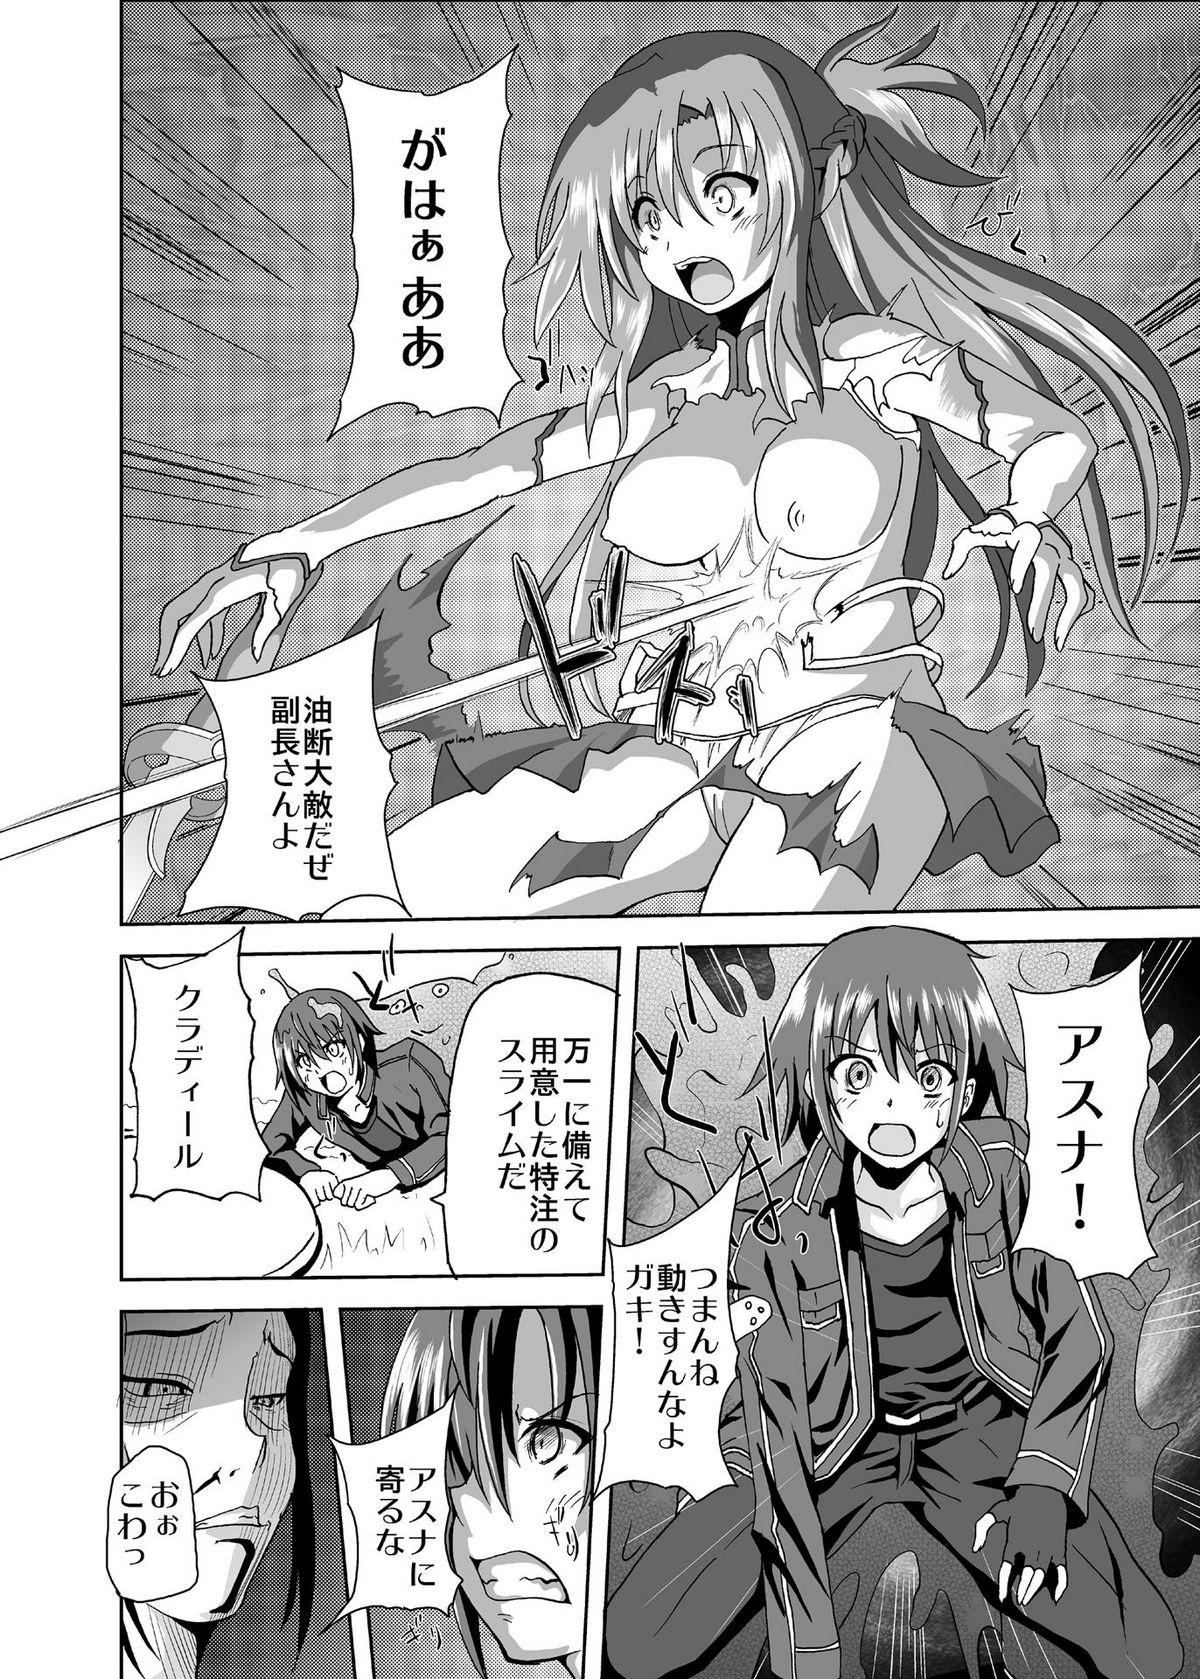 Panties Defeated Heroine A - Sword art online Glamour Porn - Page 5